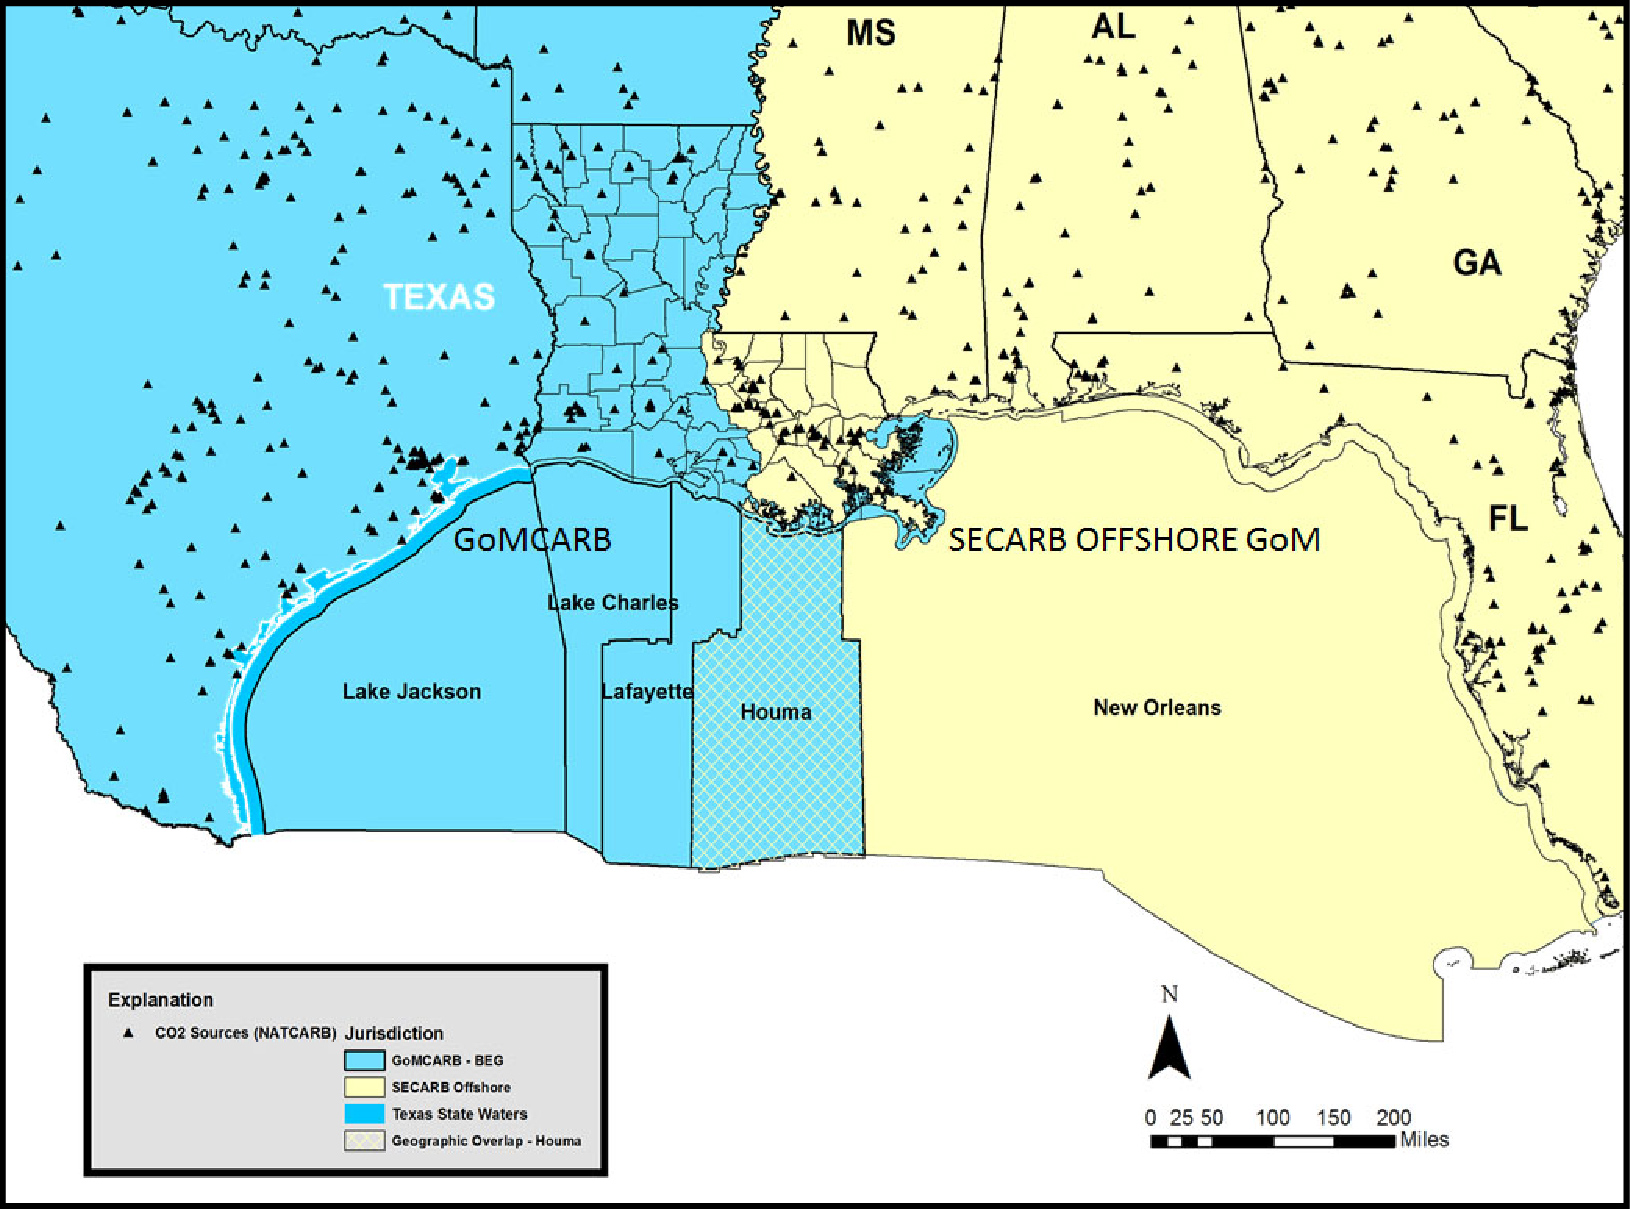 GoMCarb project works in the state waters off the coast of Texas and Louisiana